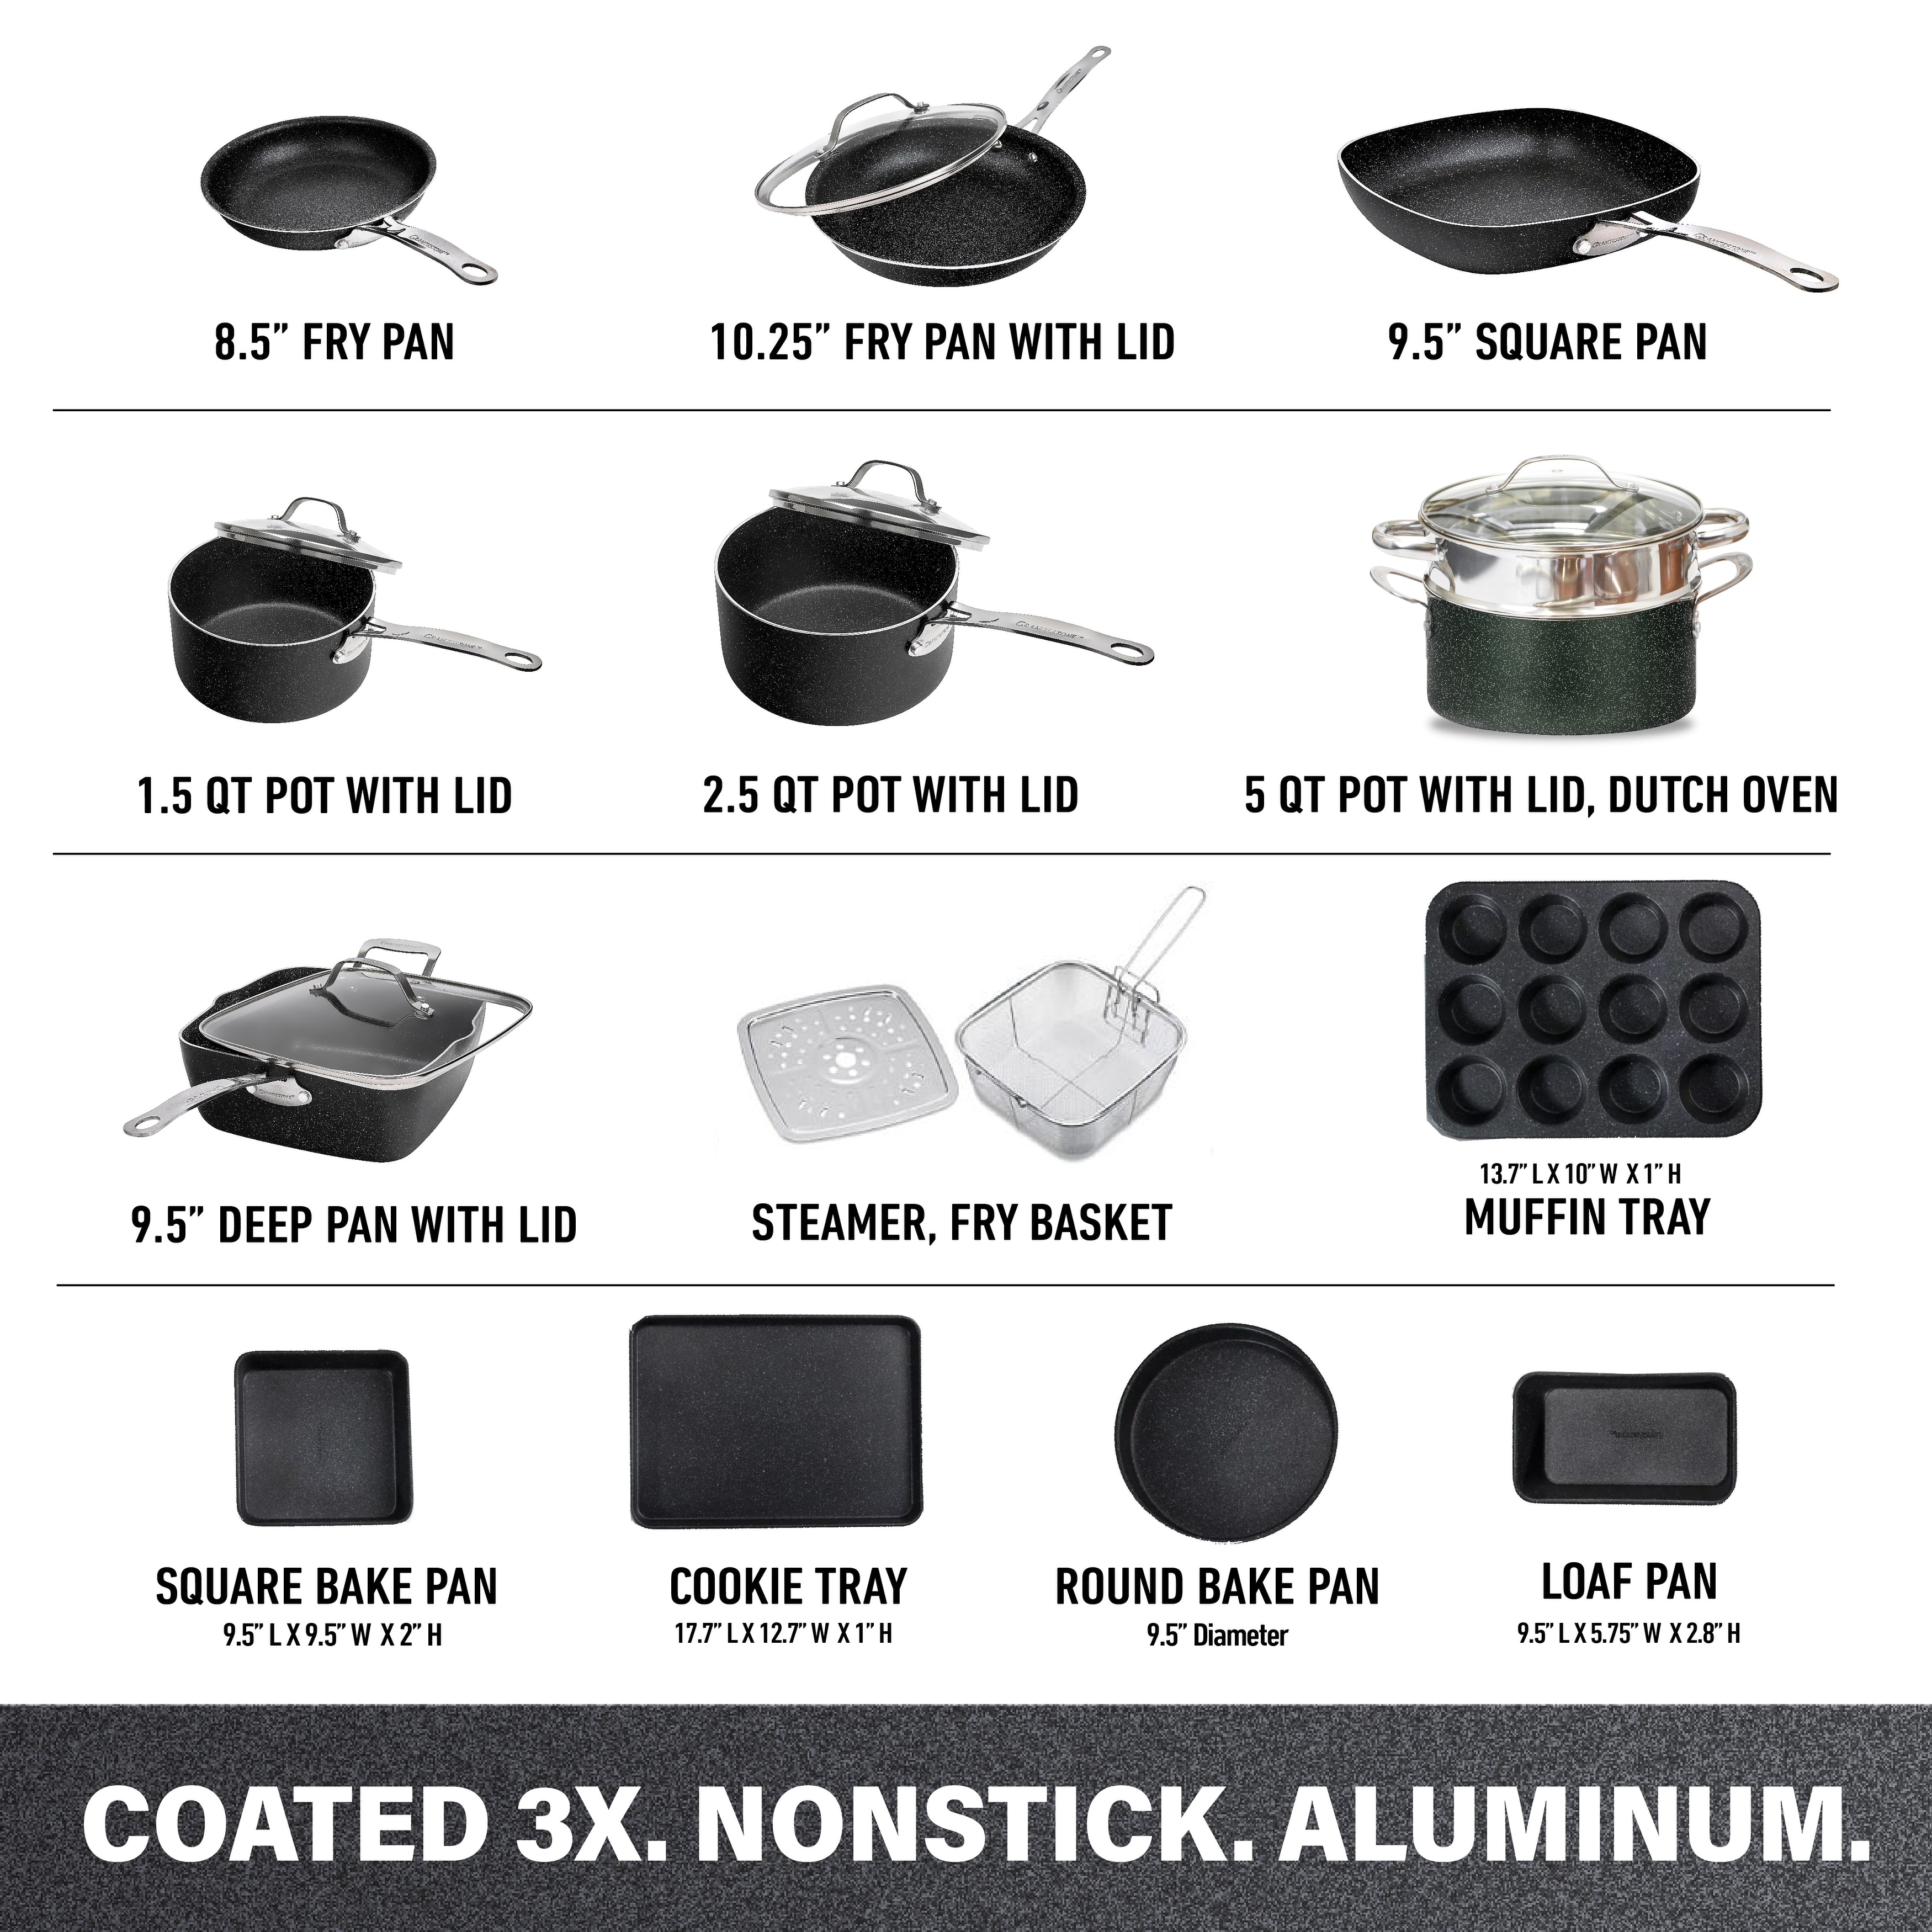 https://ak1.ostkcdn.com/images/products/is/images/direct/145d1c732d723ccd8f173b705e028b0fd75b0221/Granitestone-Diamond-Non-Stick-20pc-Complete-Cookware-and-Bakeware-Set.jpg